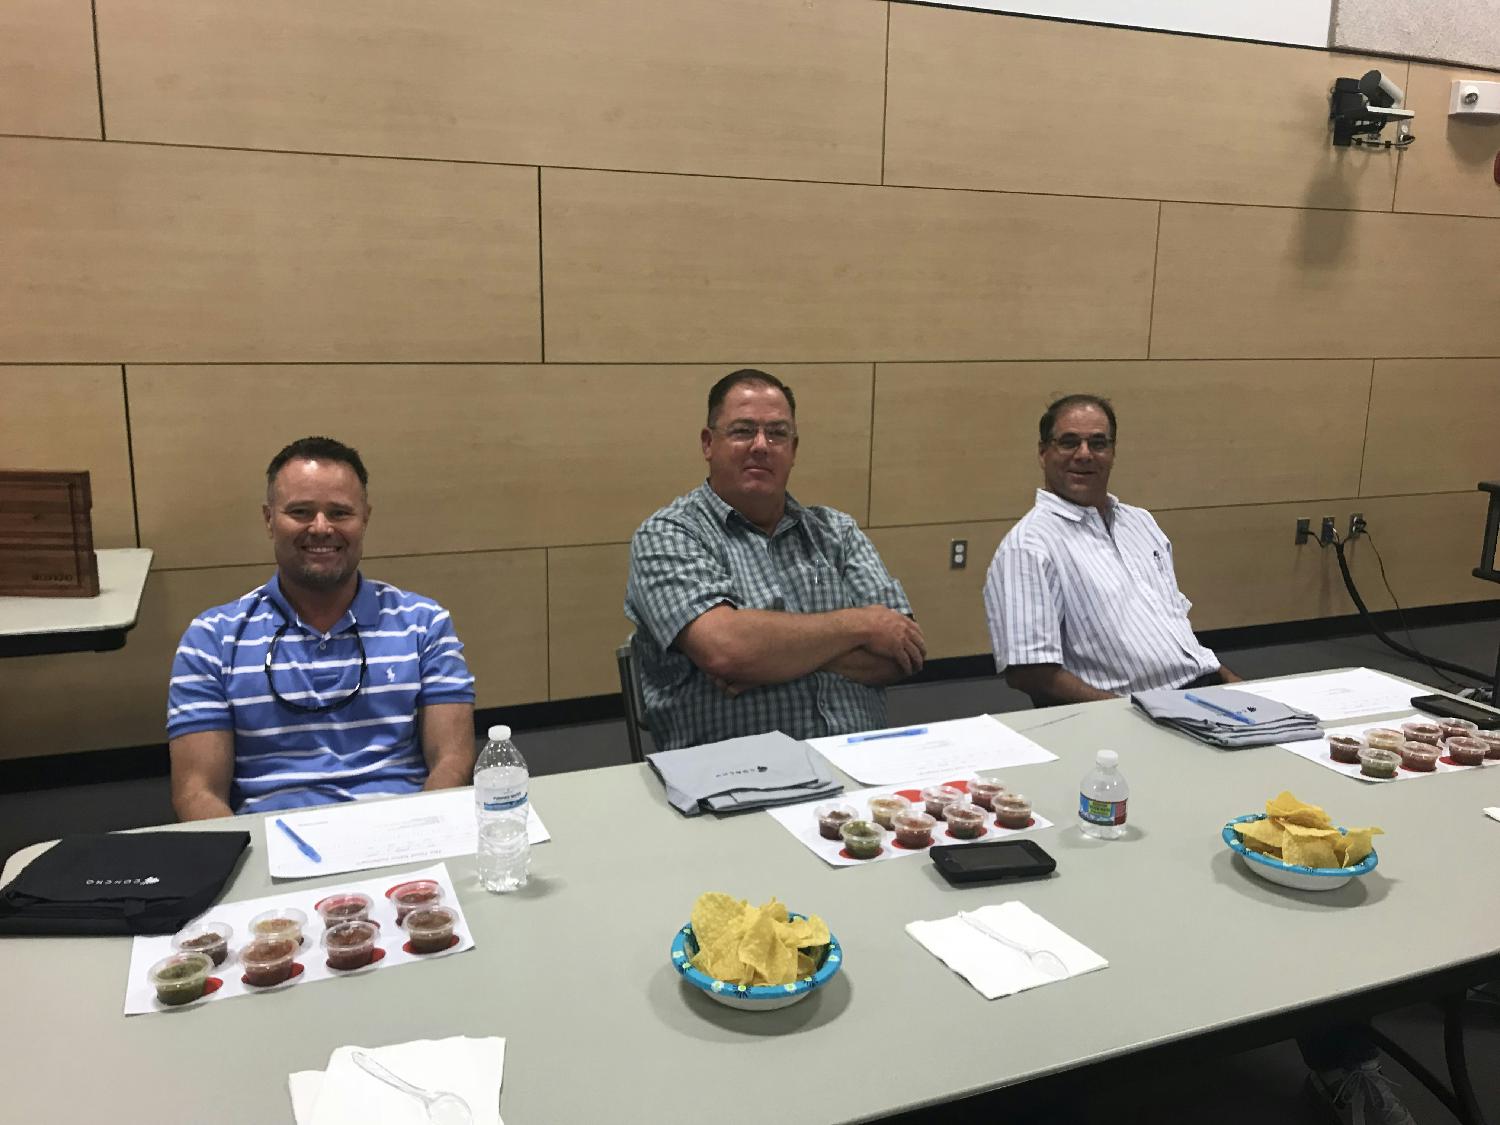 Employees judging salsa entries for annual salsa contest in our Artesia office